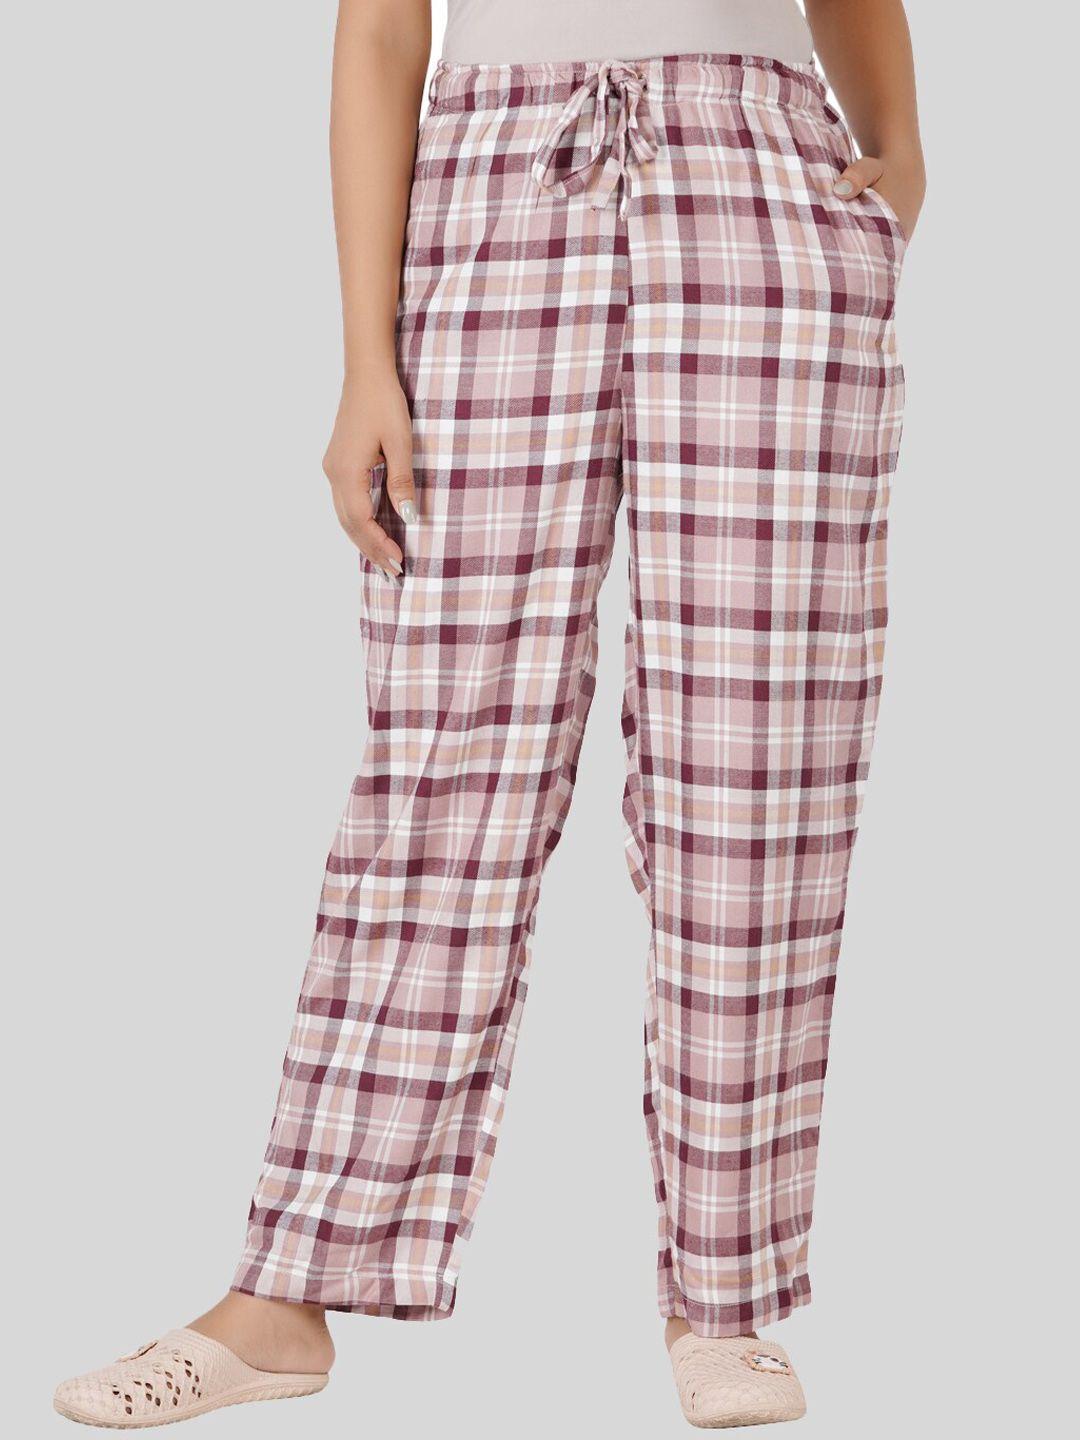 style shoes women checked mid-rise lounge pants